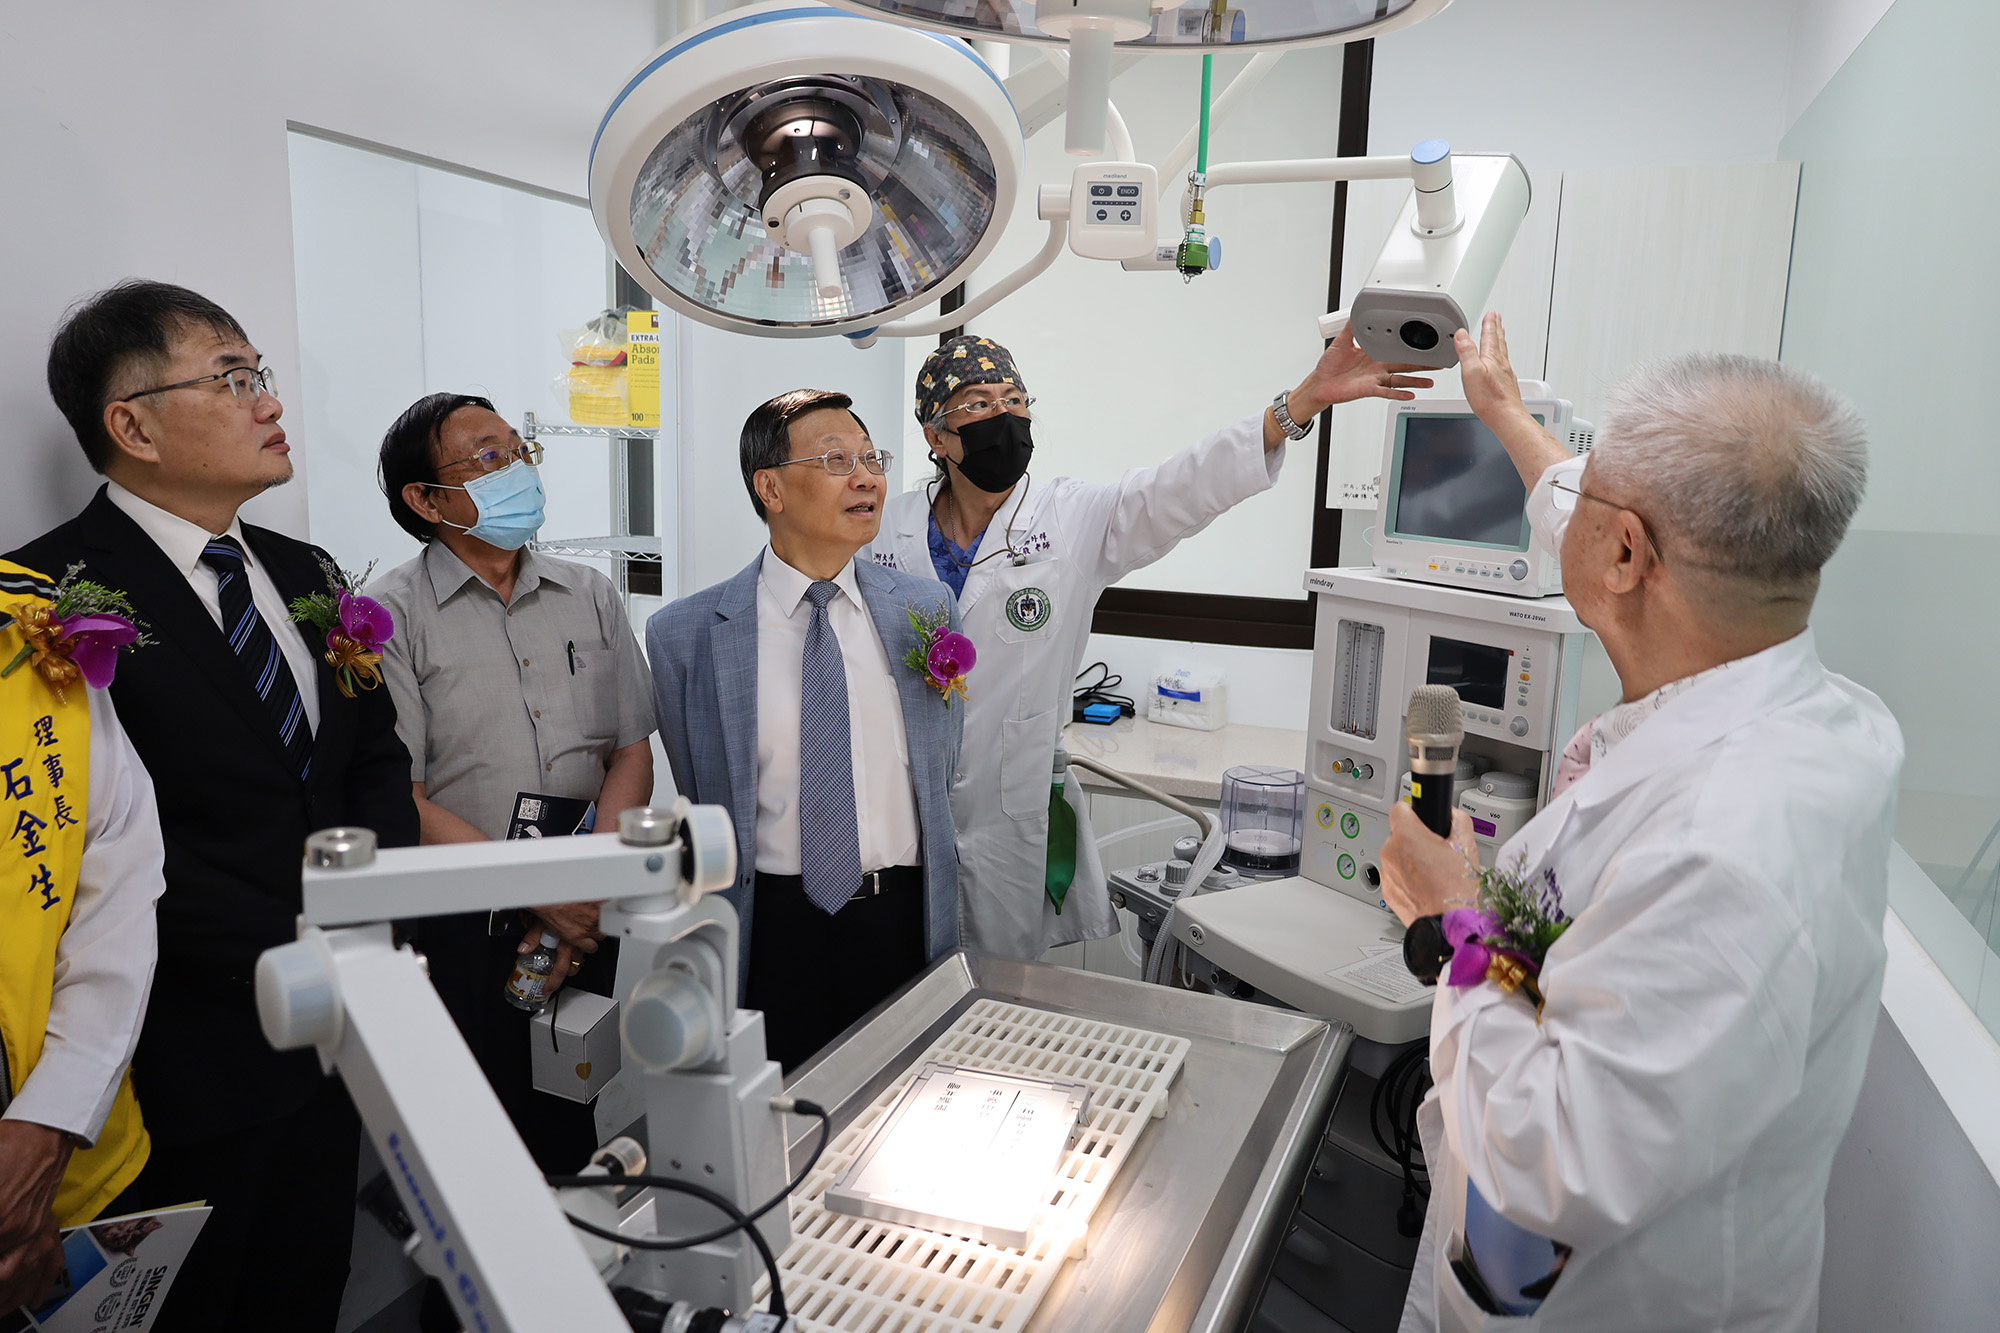 Department of Post-Baccalaureate Veterinary Medicine at Asia University benefits from Asia University Veterinary Teaching Hospital, offering students internship opportunities. The image shows Asia University President Jeffrey J.P. Tsai (3rd from the right) and others visiting the highly advanced surgical room facilities at Asia University Veterinary Teaching Hospital